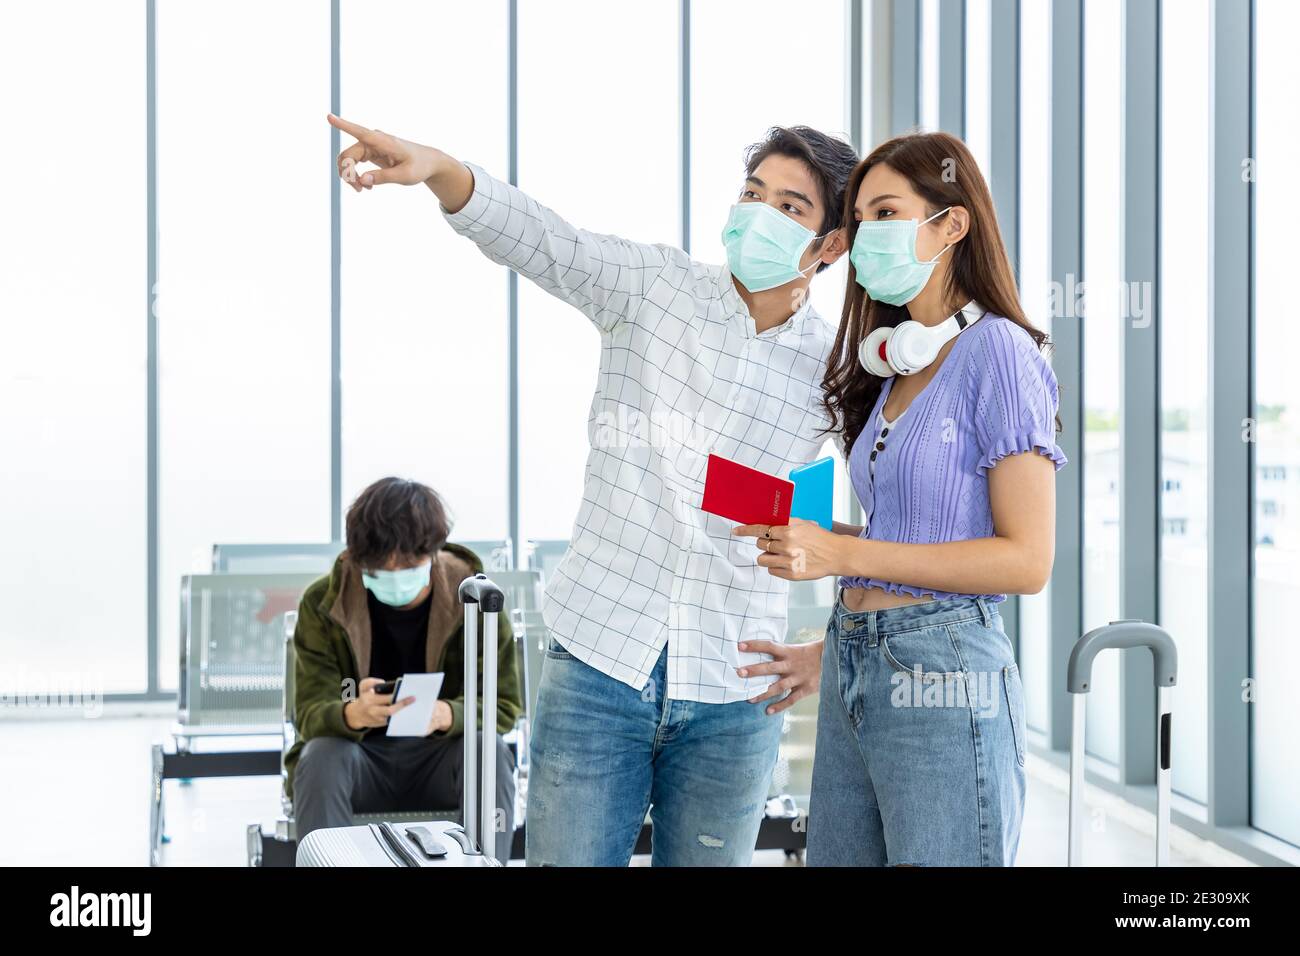 Couple travelers wearing protective mask in airport, during Covid-19 pandemic, with social distancing protocol. Holding passport and document preparin Stock Photo